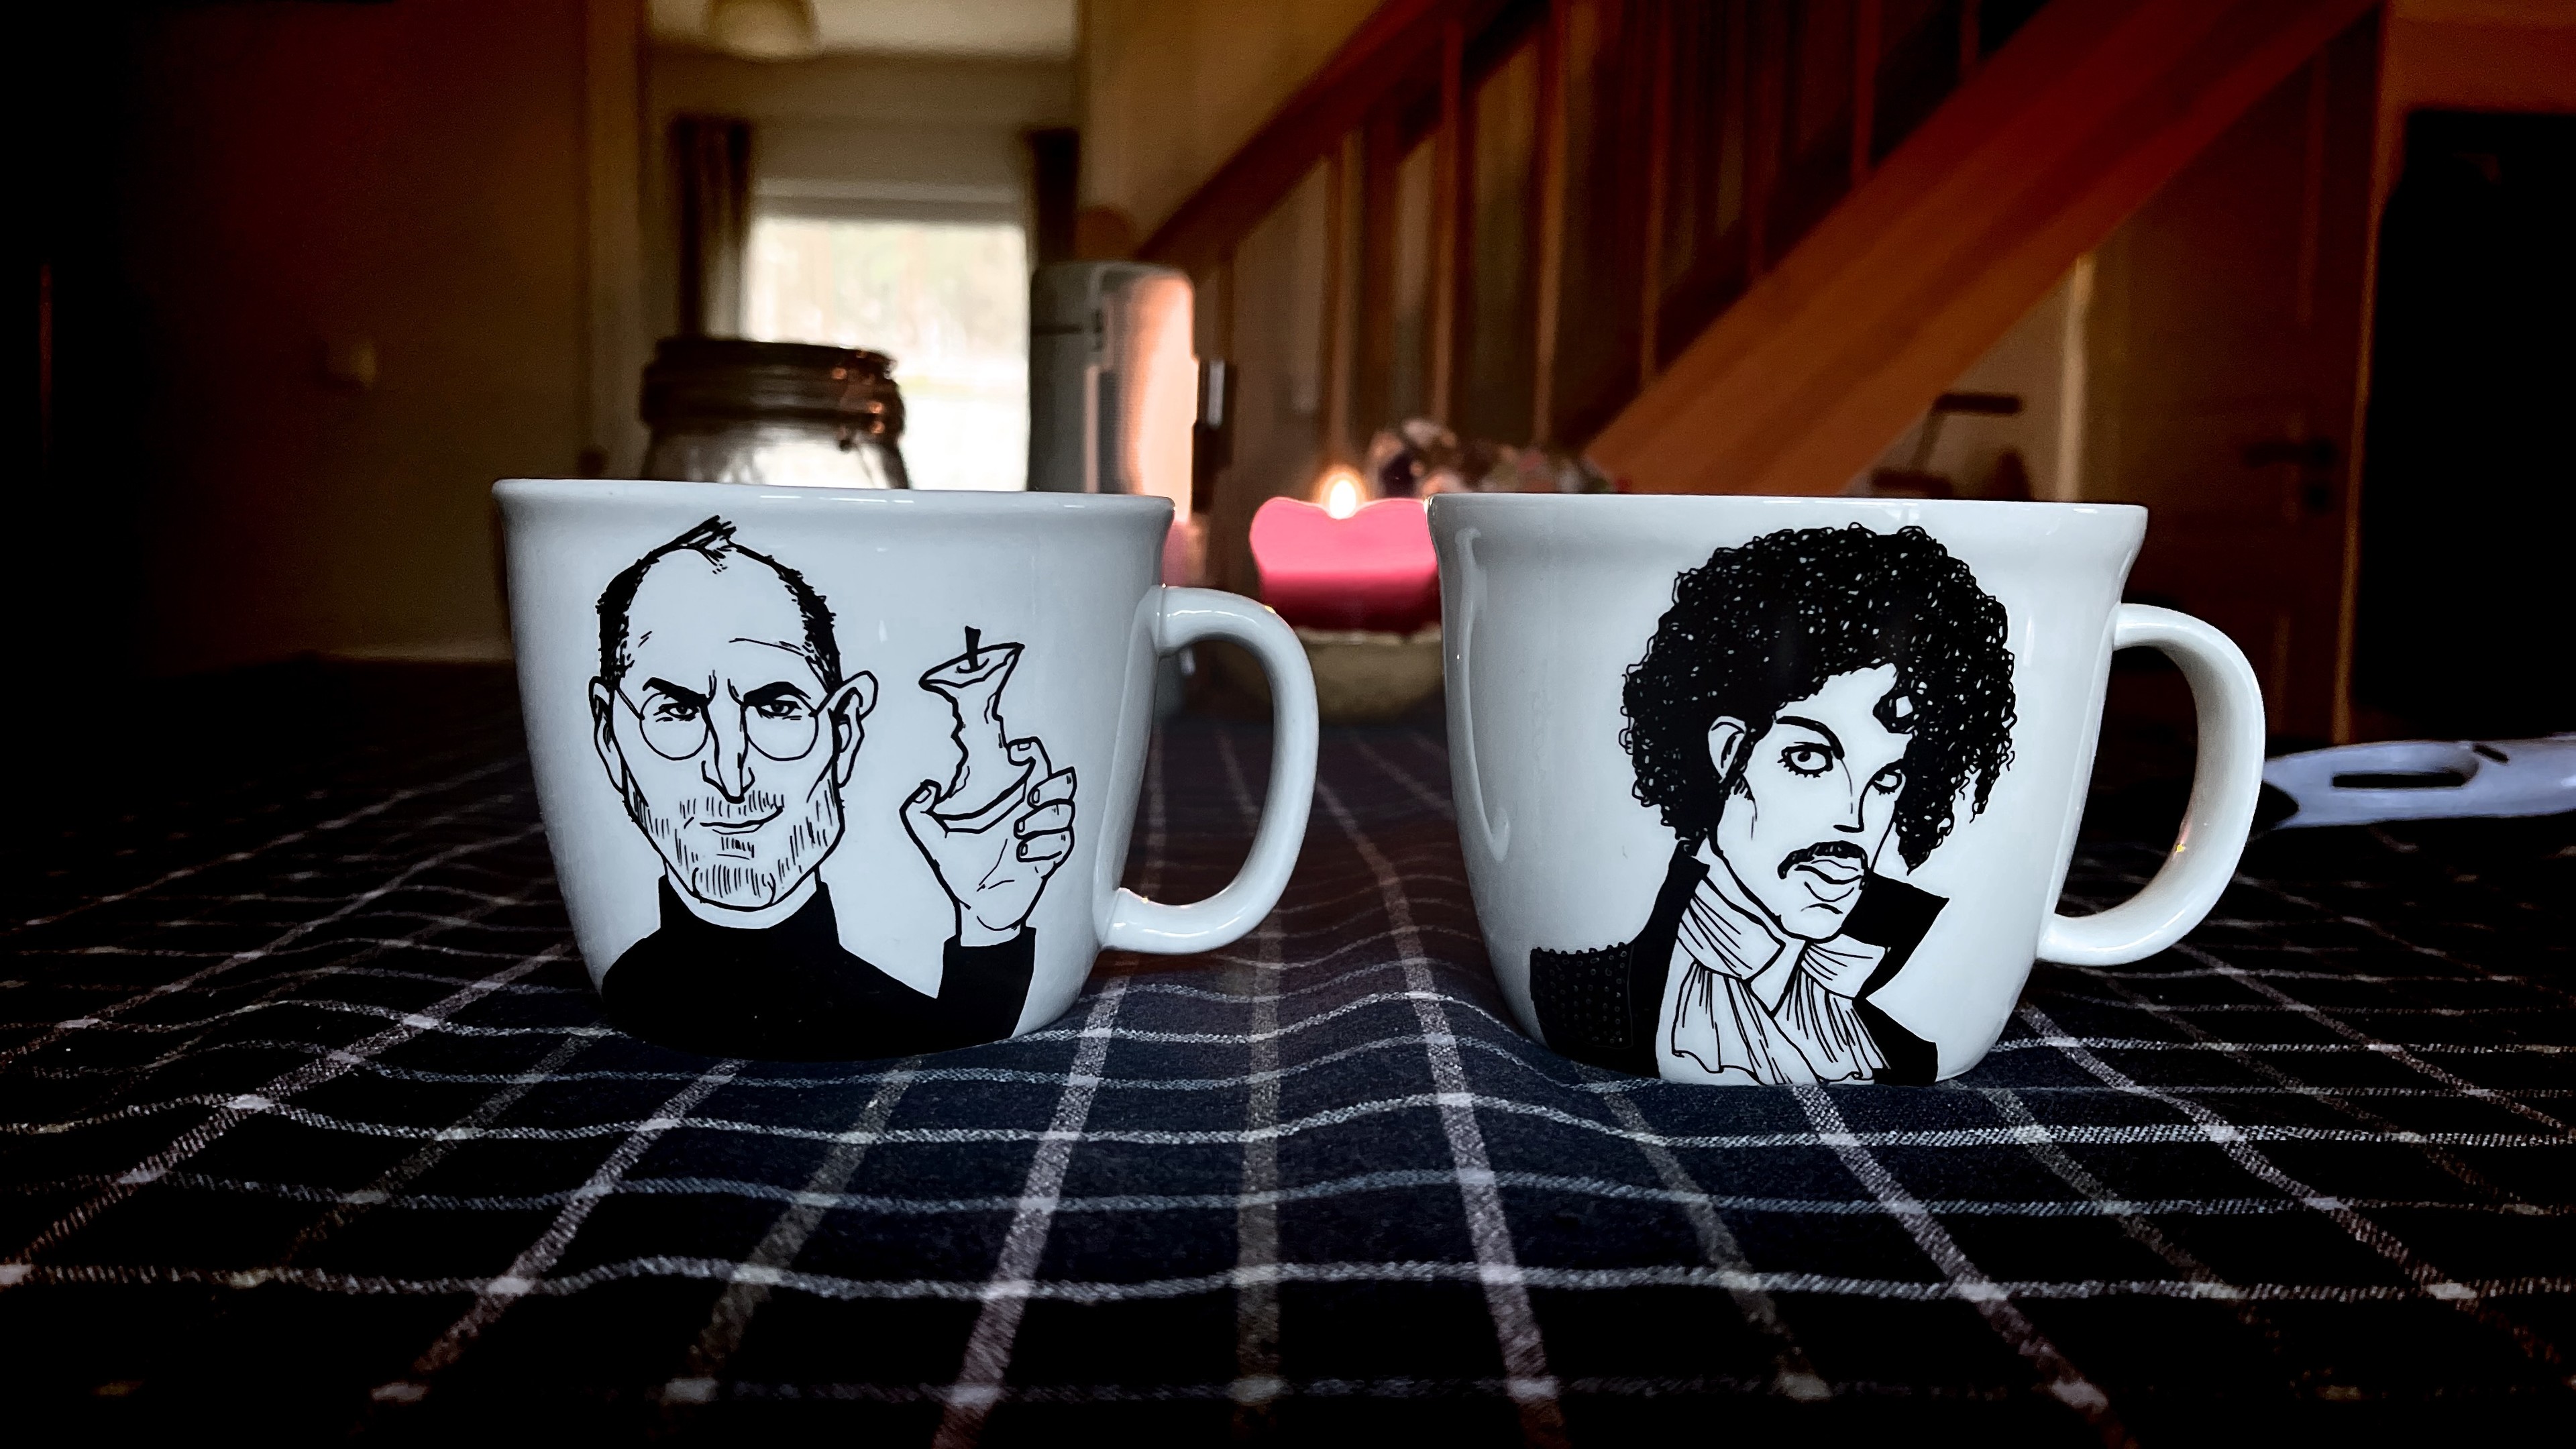 Two coffee mugs with illustrated portraits on a checkered surface, with a cozy room in the background.